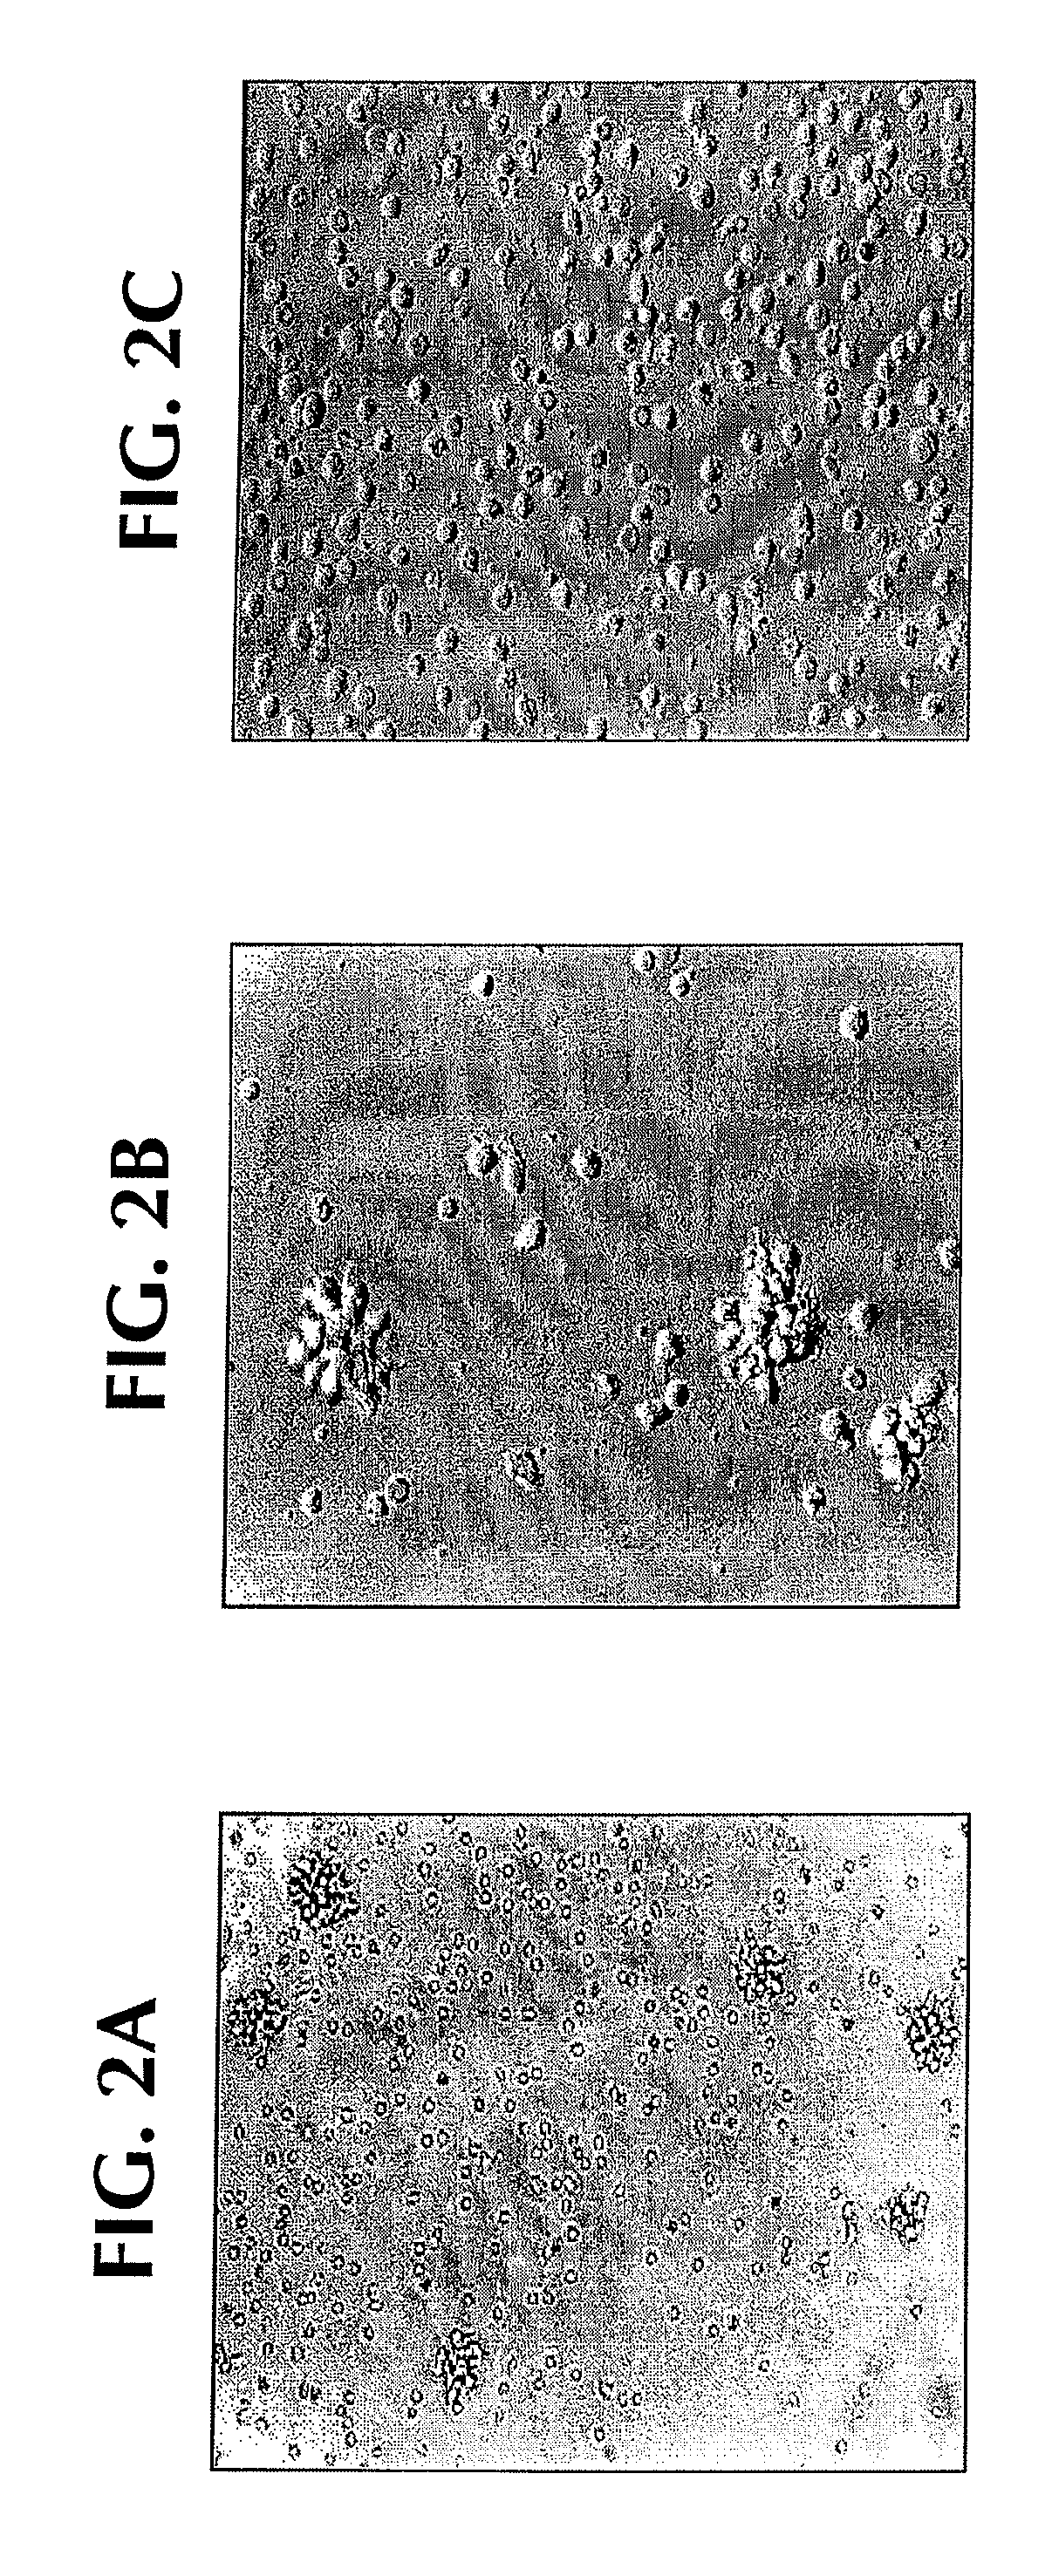 Methods for Treating Autoimmune Diseases in a Subject and In Vitro Diagnostic Assays